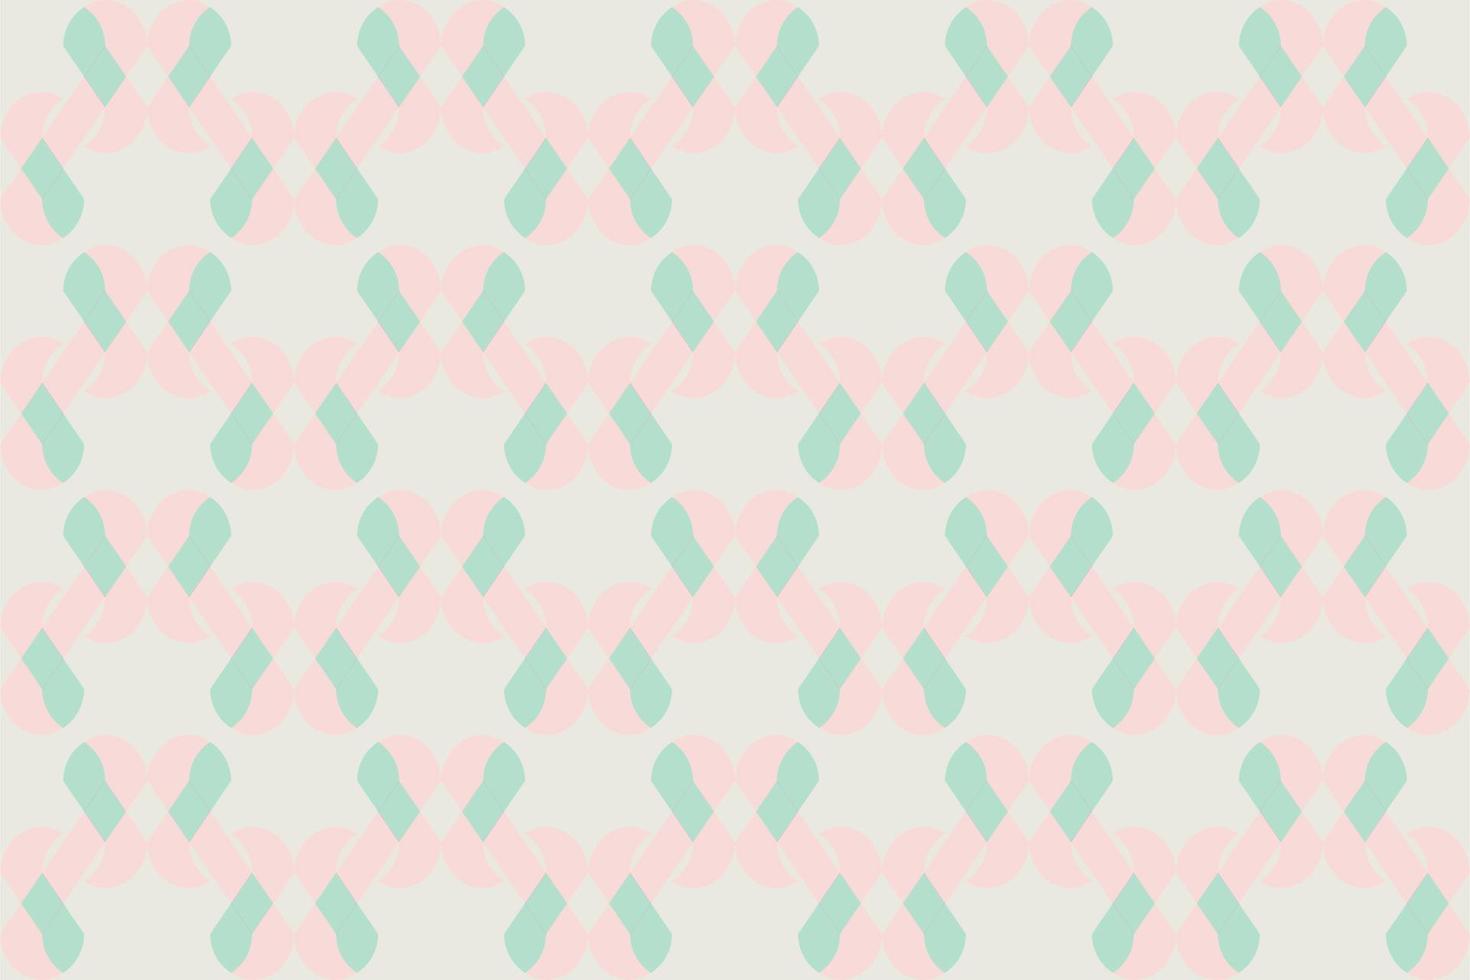 Background soft colors vector